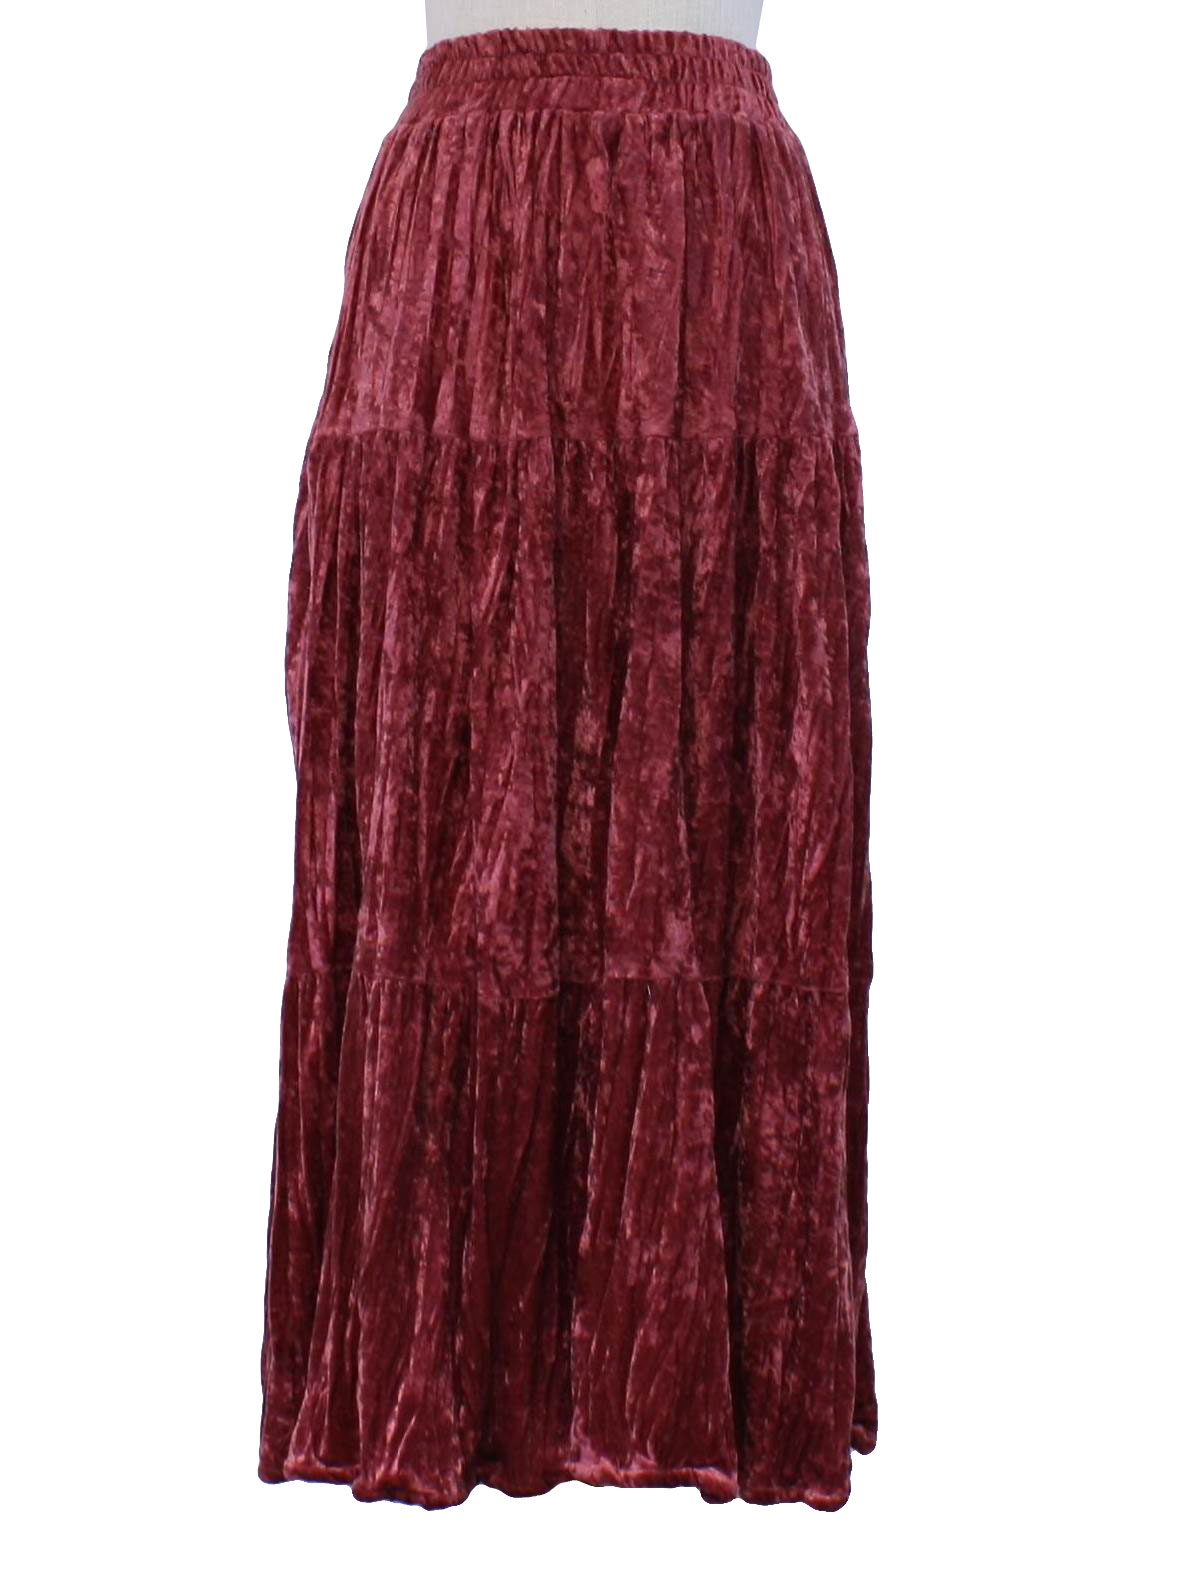 Eighties Vintage Hippie Skirt: 80s -To Chic- Womens dusty rose ...